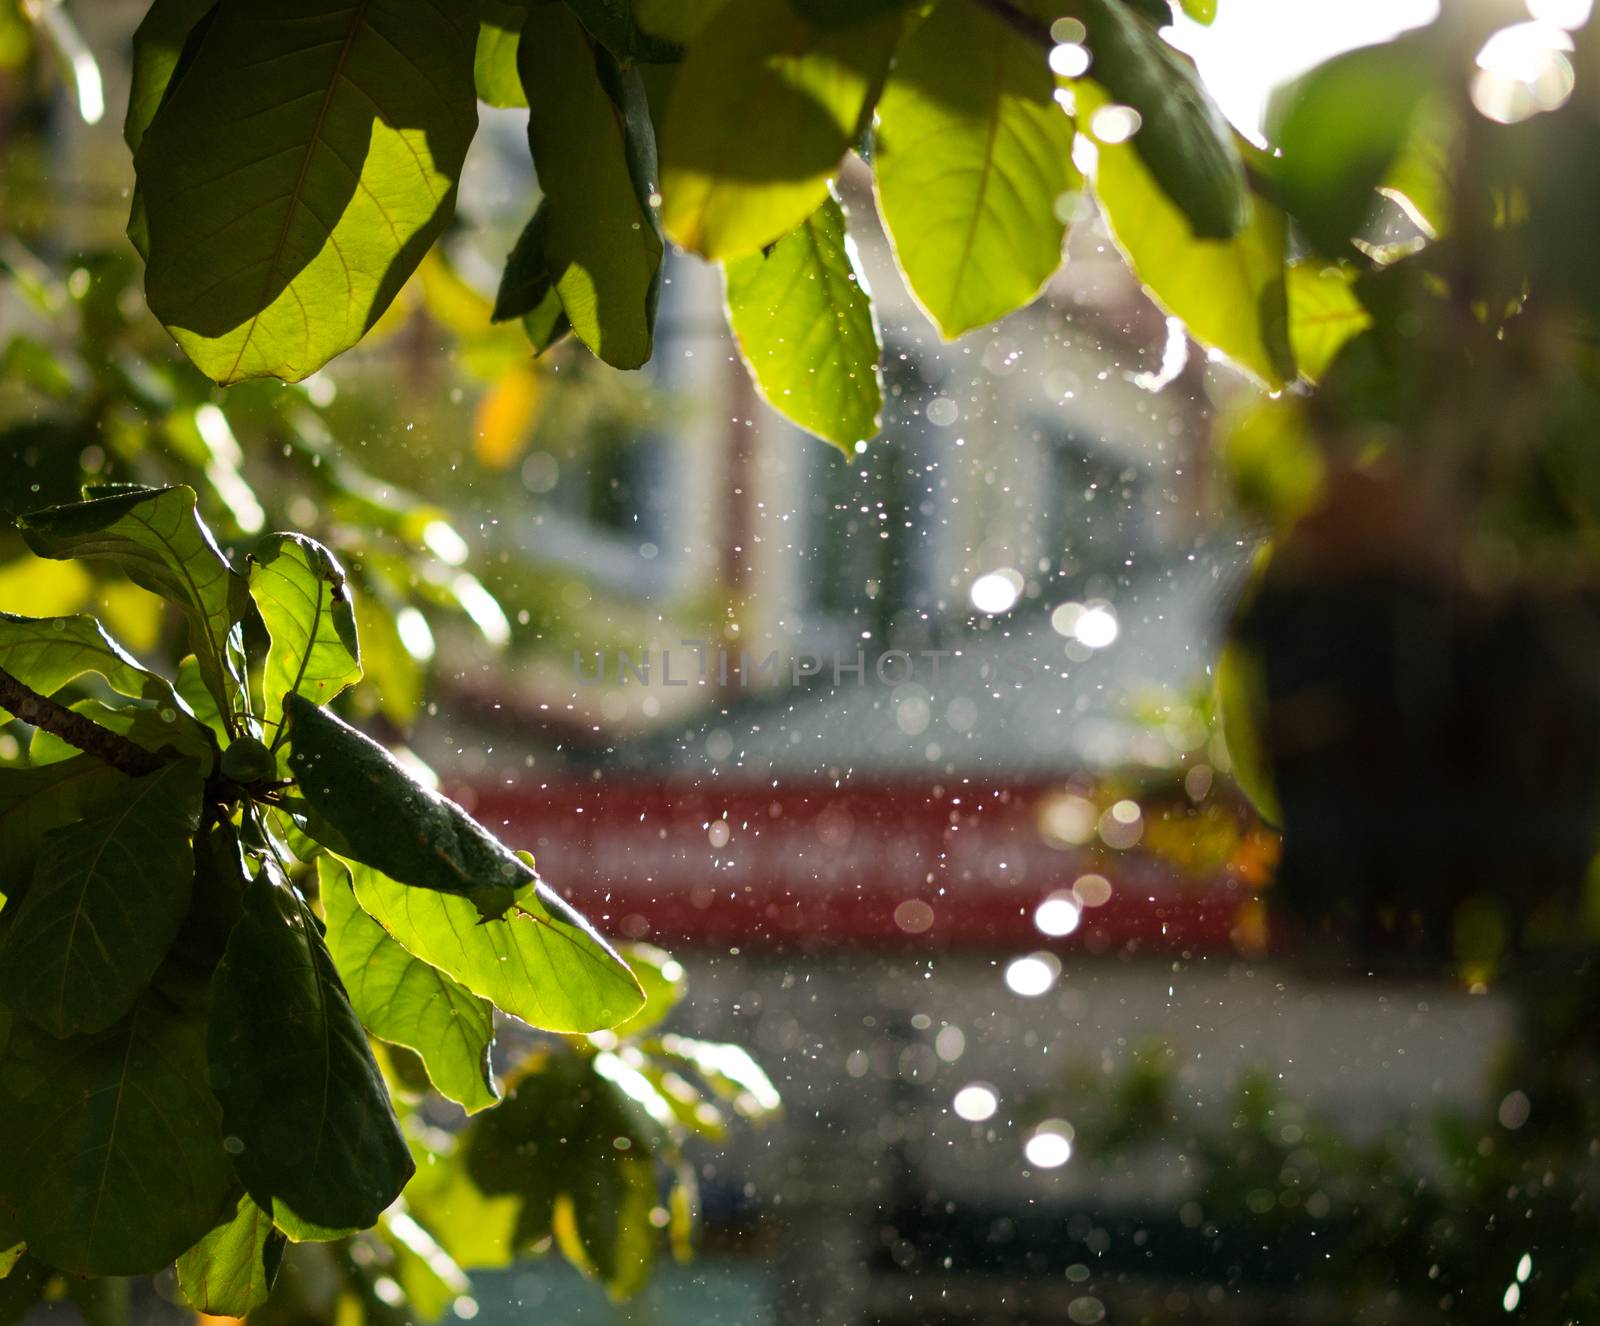 COLOR PHOTO OF CLOSE-UP OF RAINDROPS AND BLURRY LEAVES